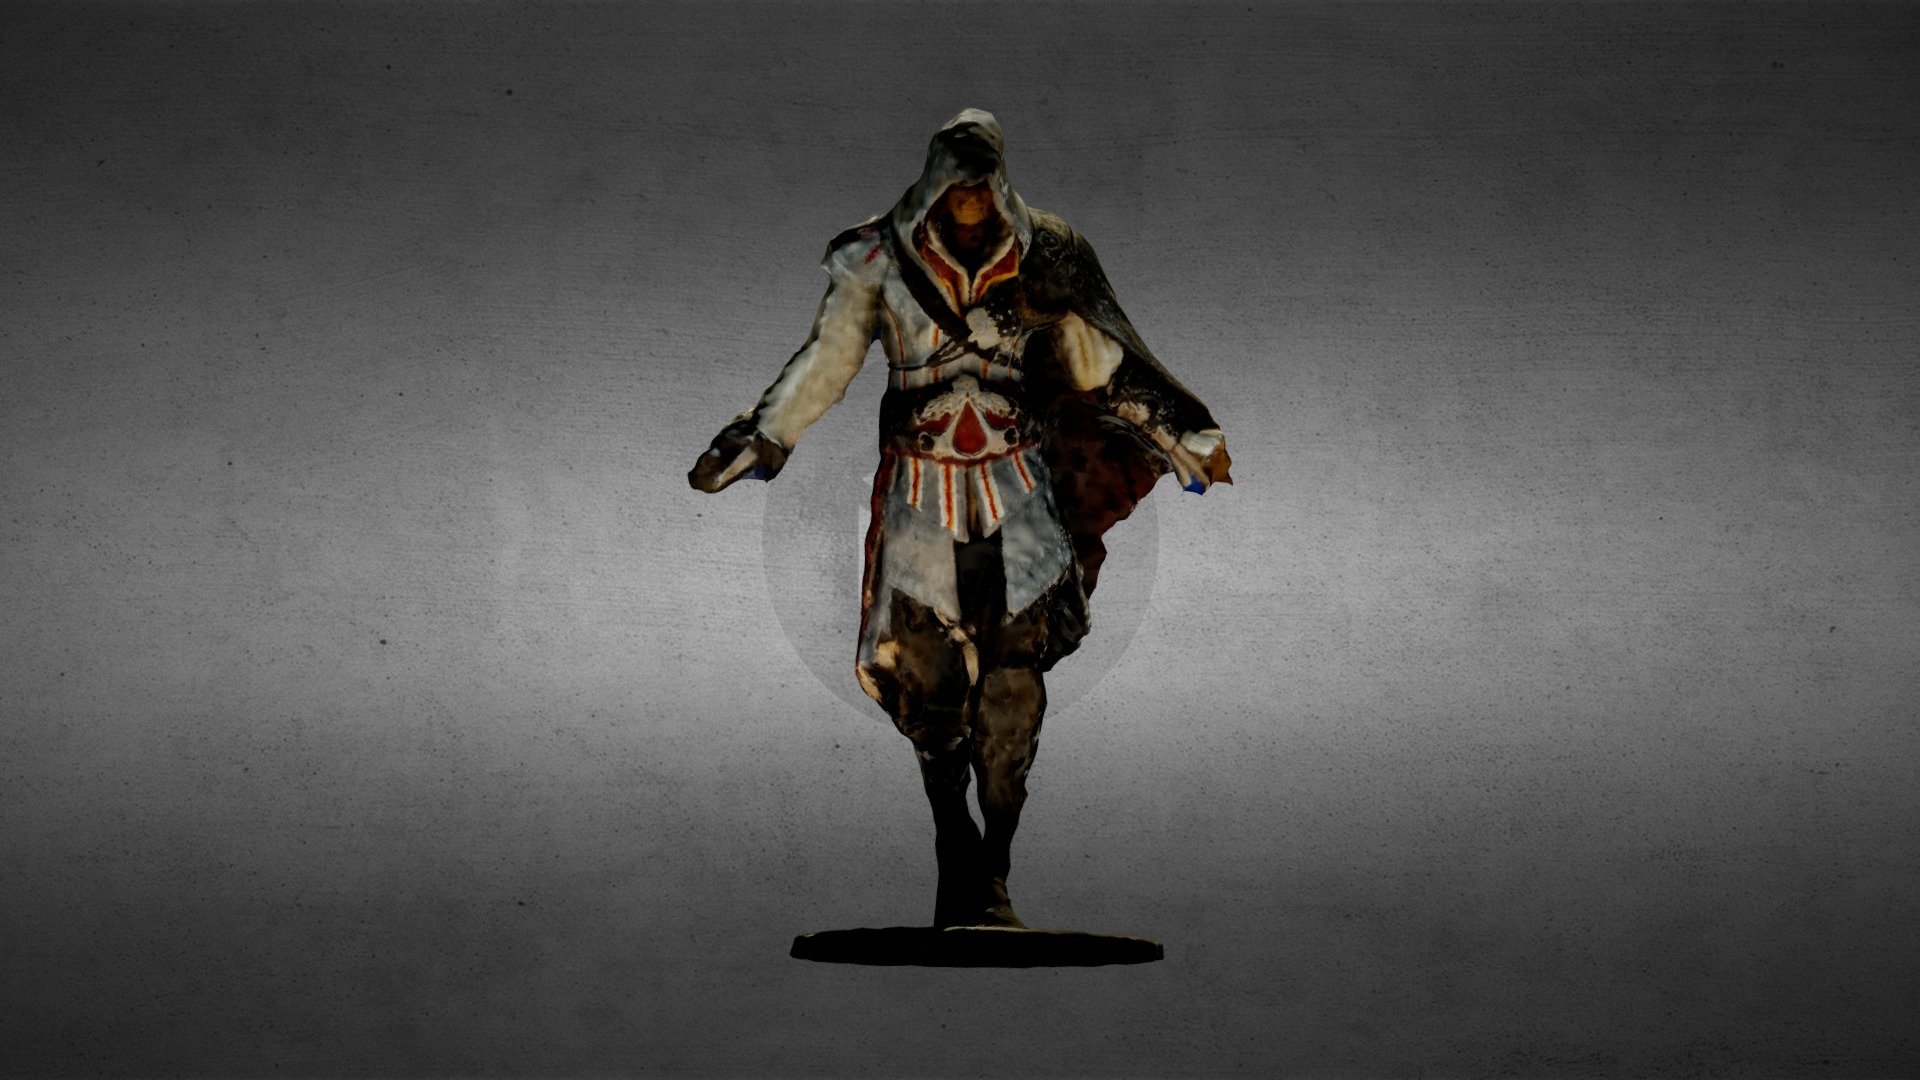 3D model of Ezio Auditore da Firenze that we realised in Poznań University of Economics. 

The edit was done in Meshroom and Meshlab to achieve clean model 3d model